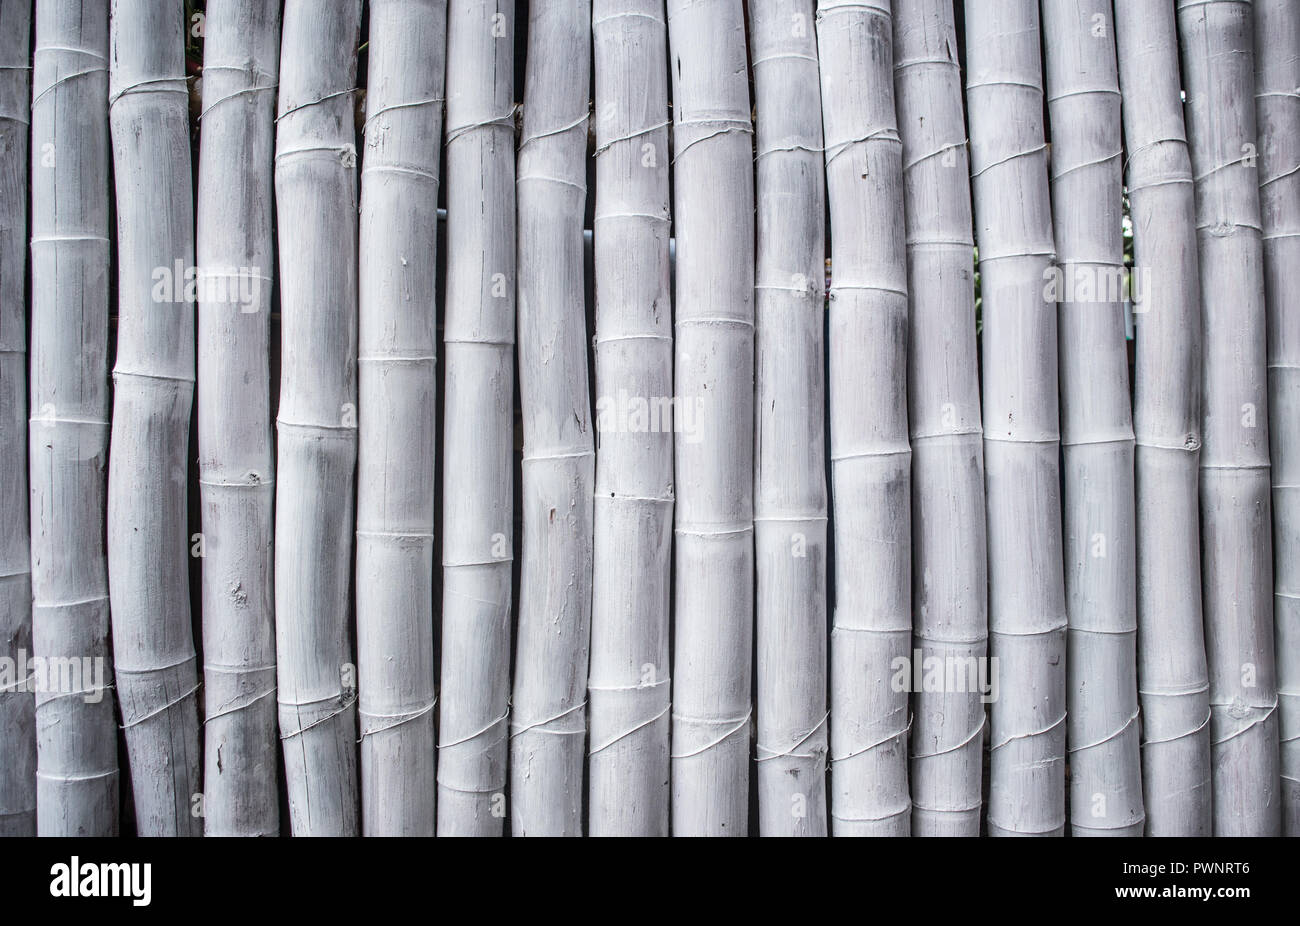 Textured background of a wall of painted white bamboo sticks Stock ...